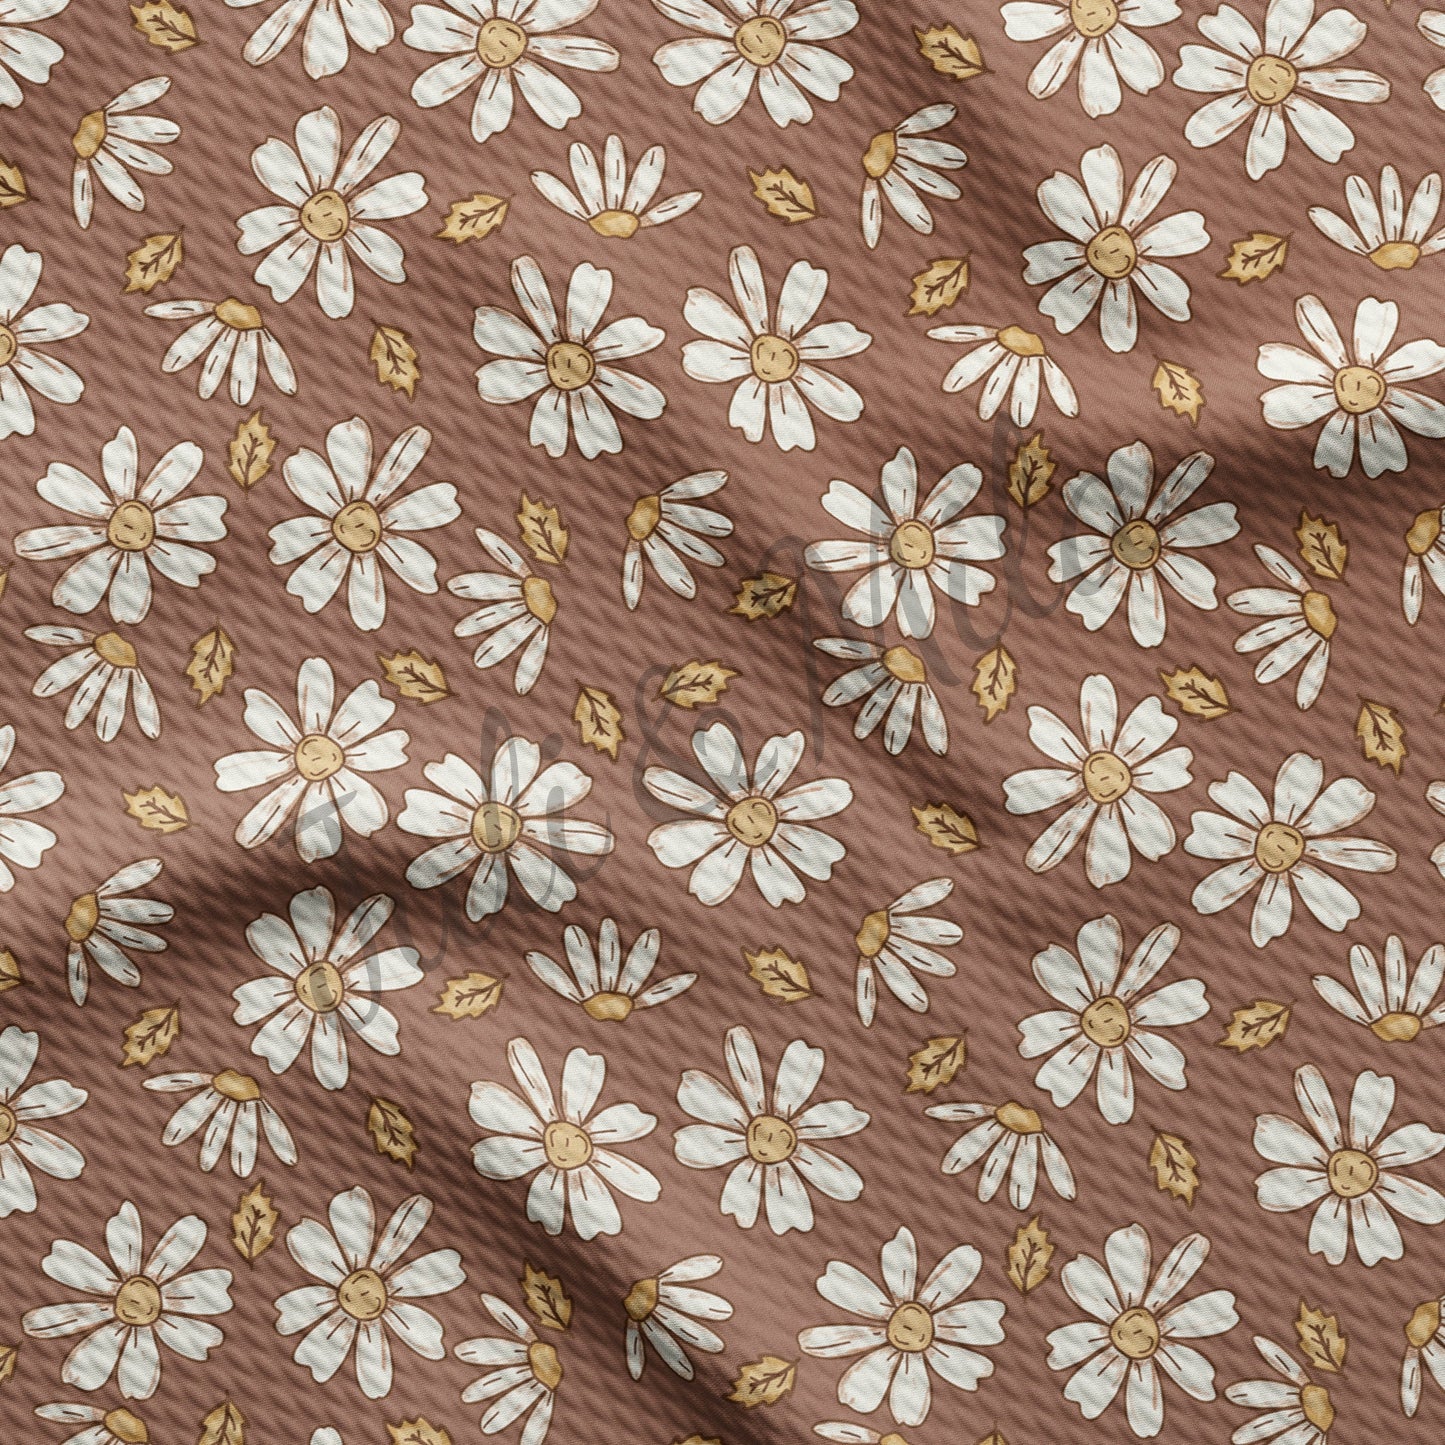 Bullet Textured Fabric Floral98